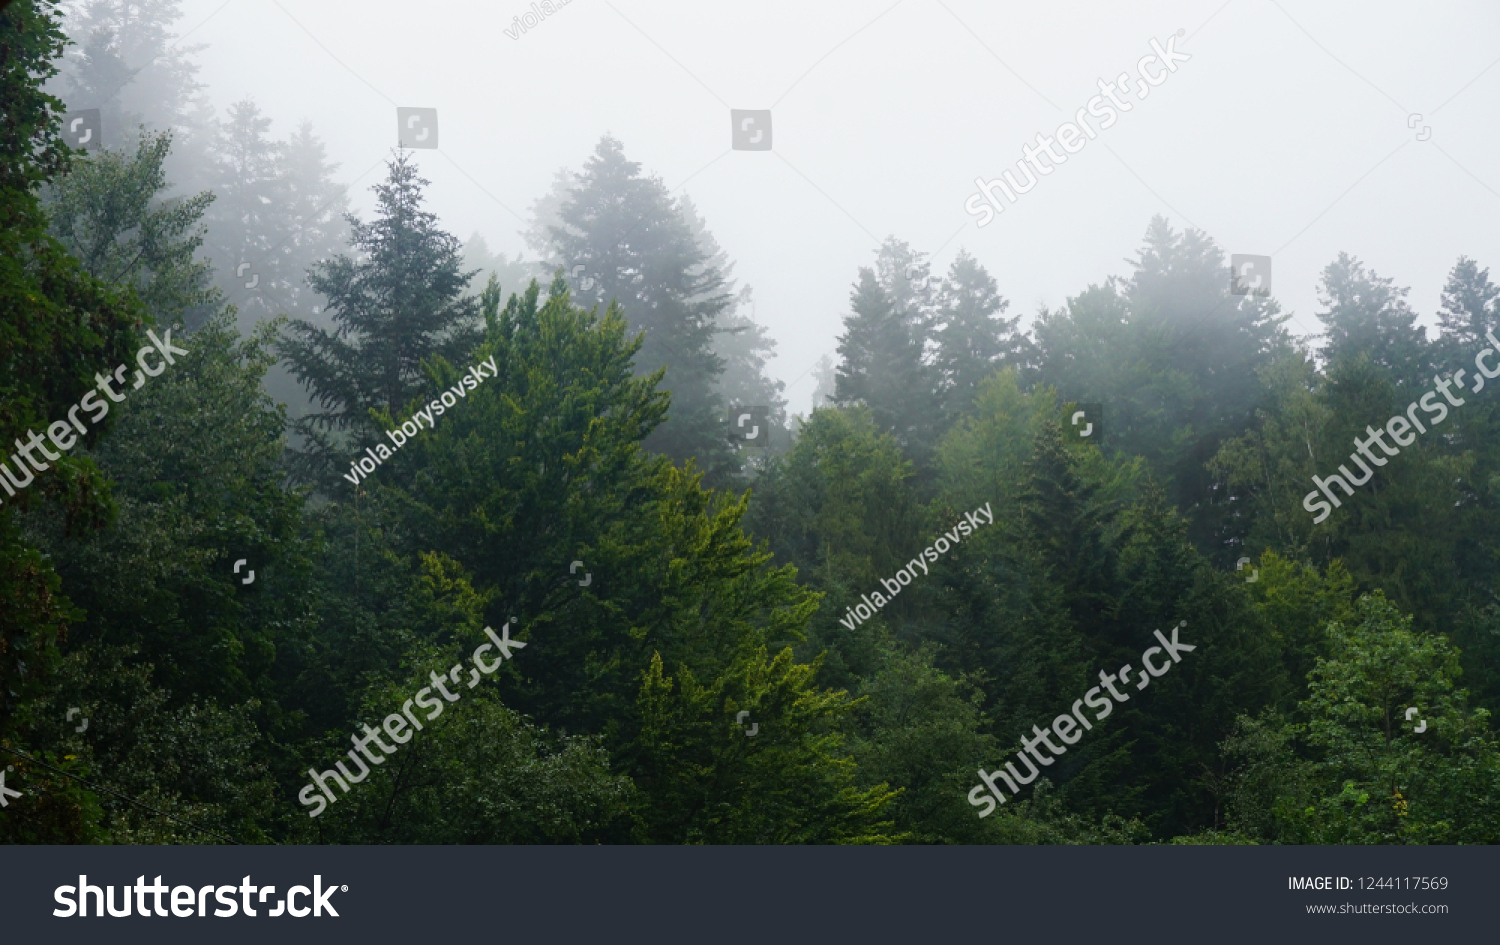 The dramatic wall fir-tree forest against the gray sky in the fog for creative background. #1244117569